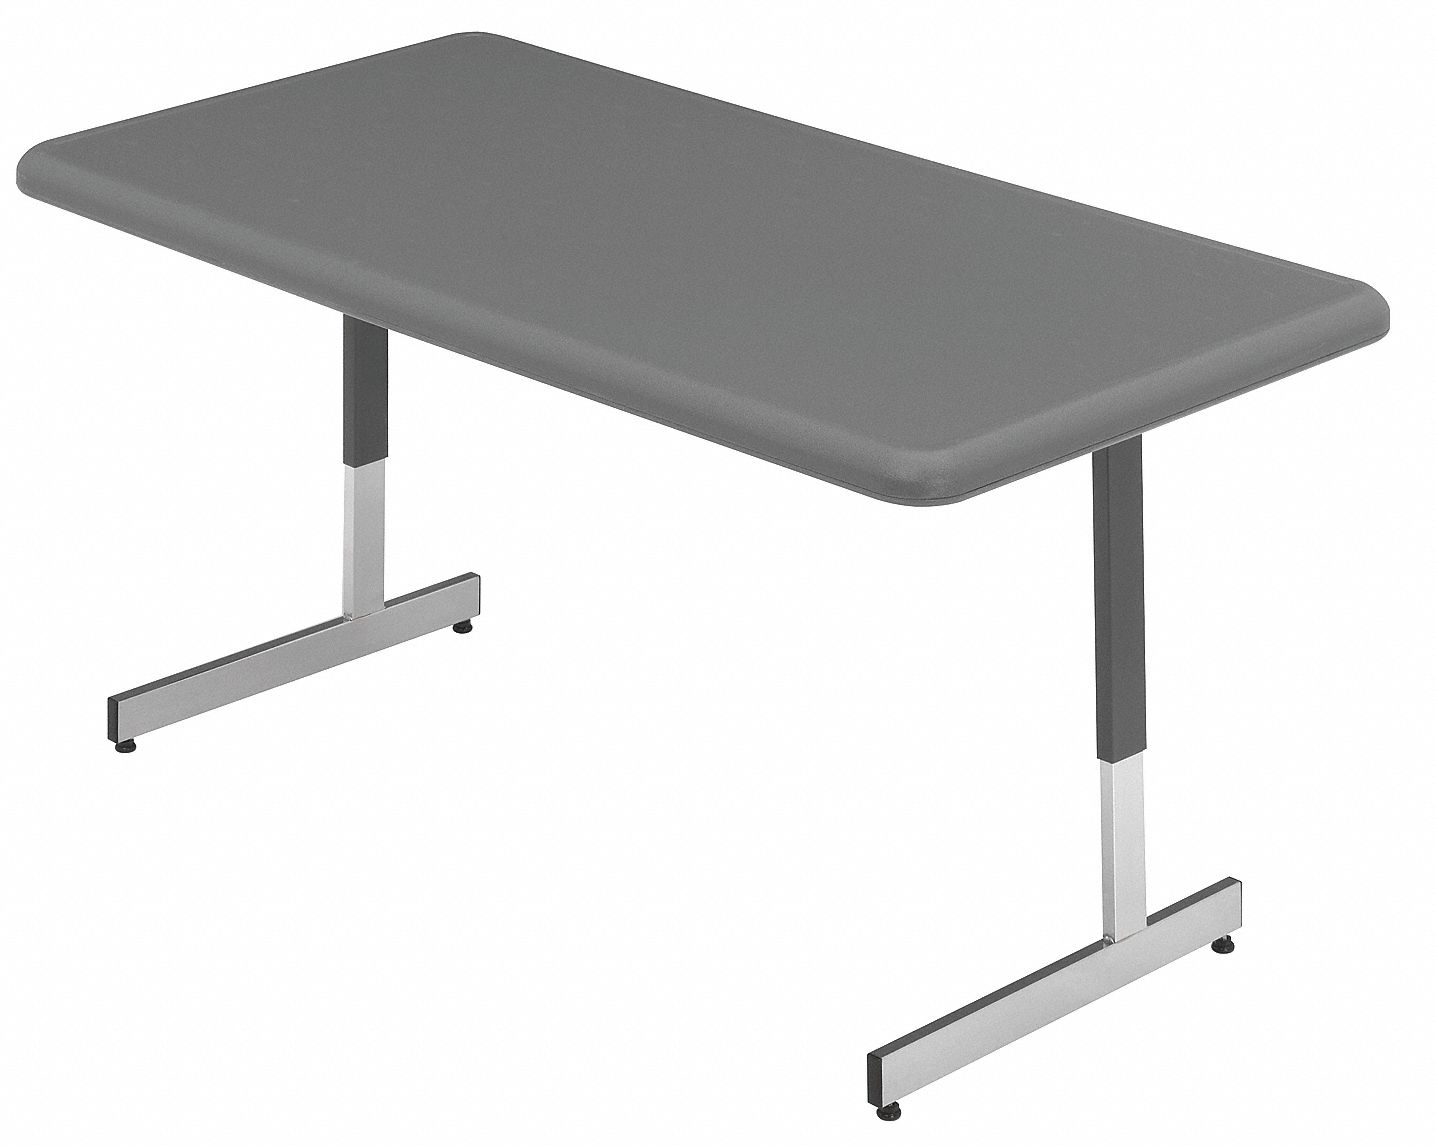 16W966 - Meeting Table Rectangle Charcoal 48 W